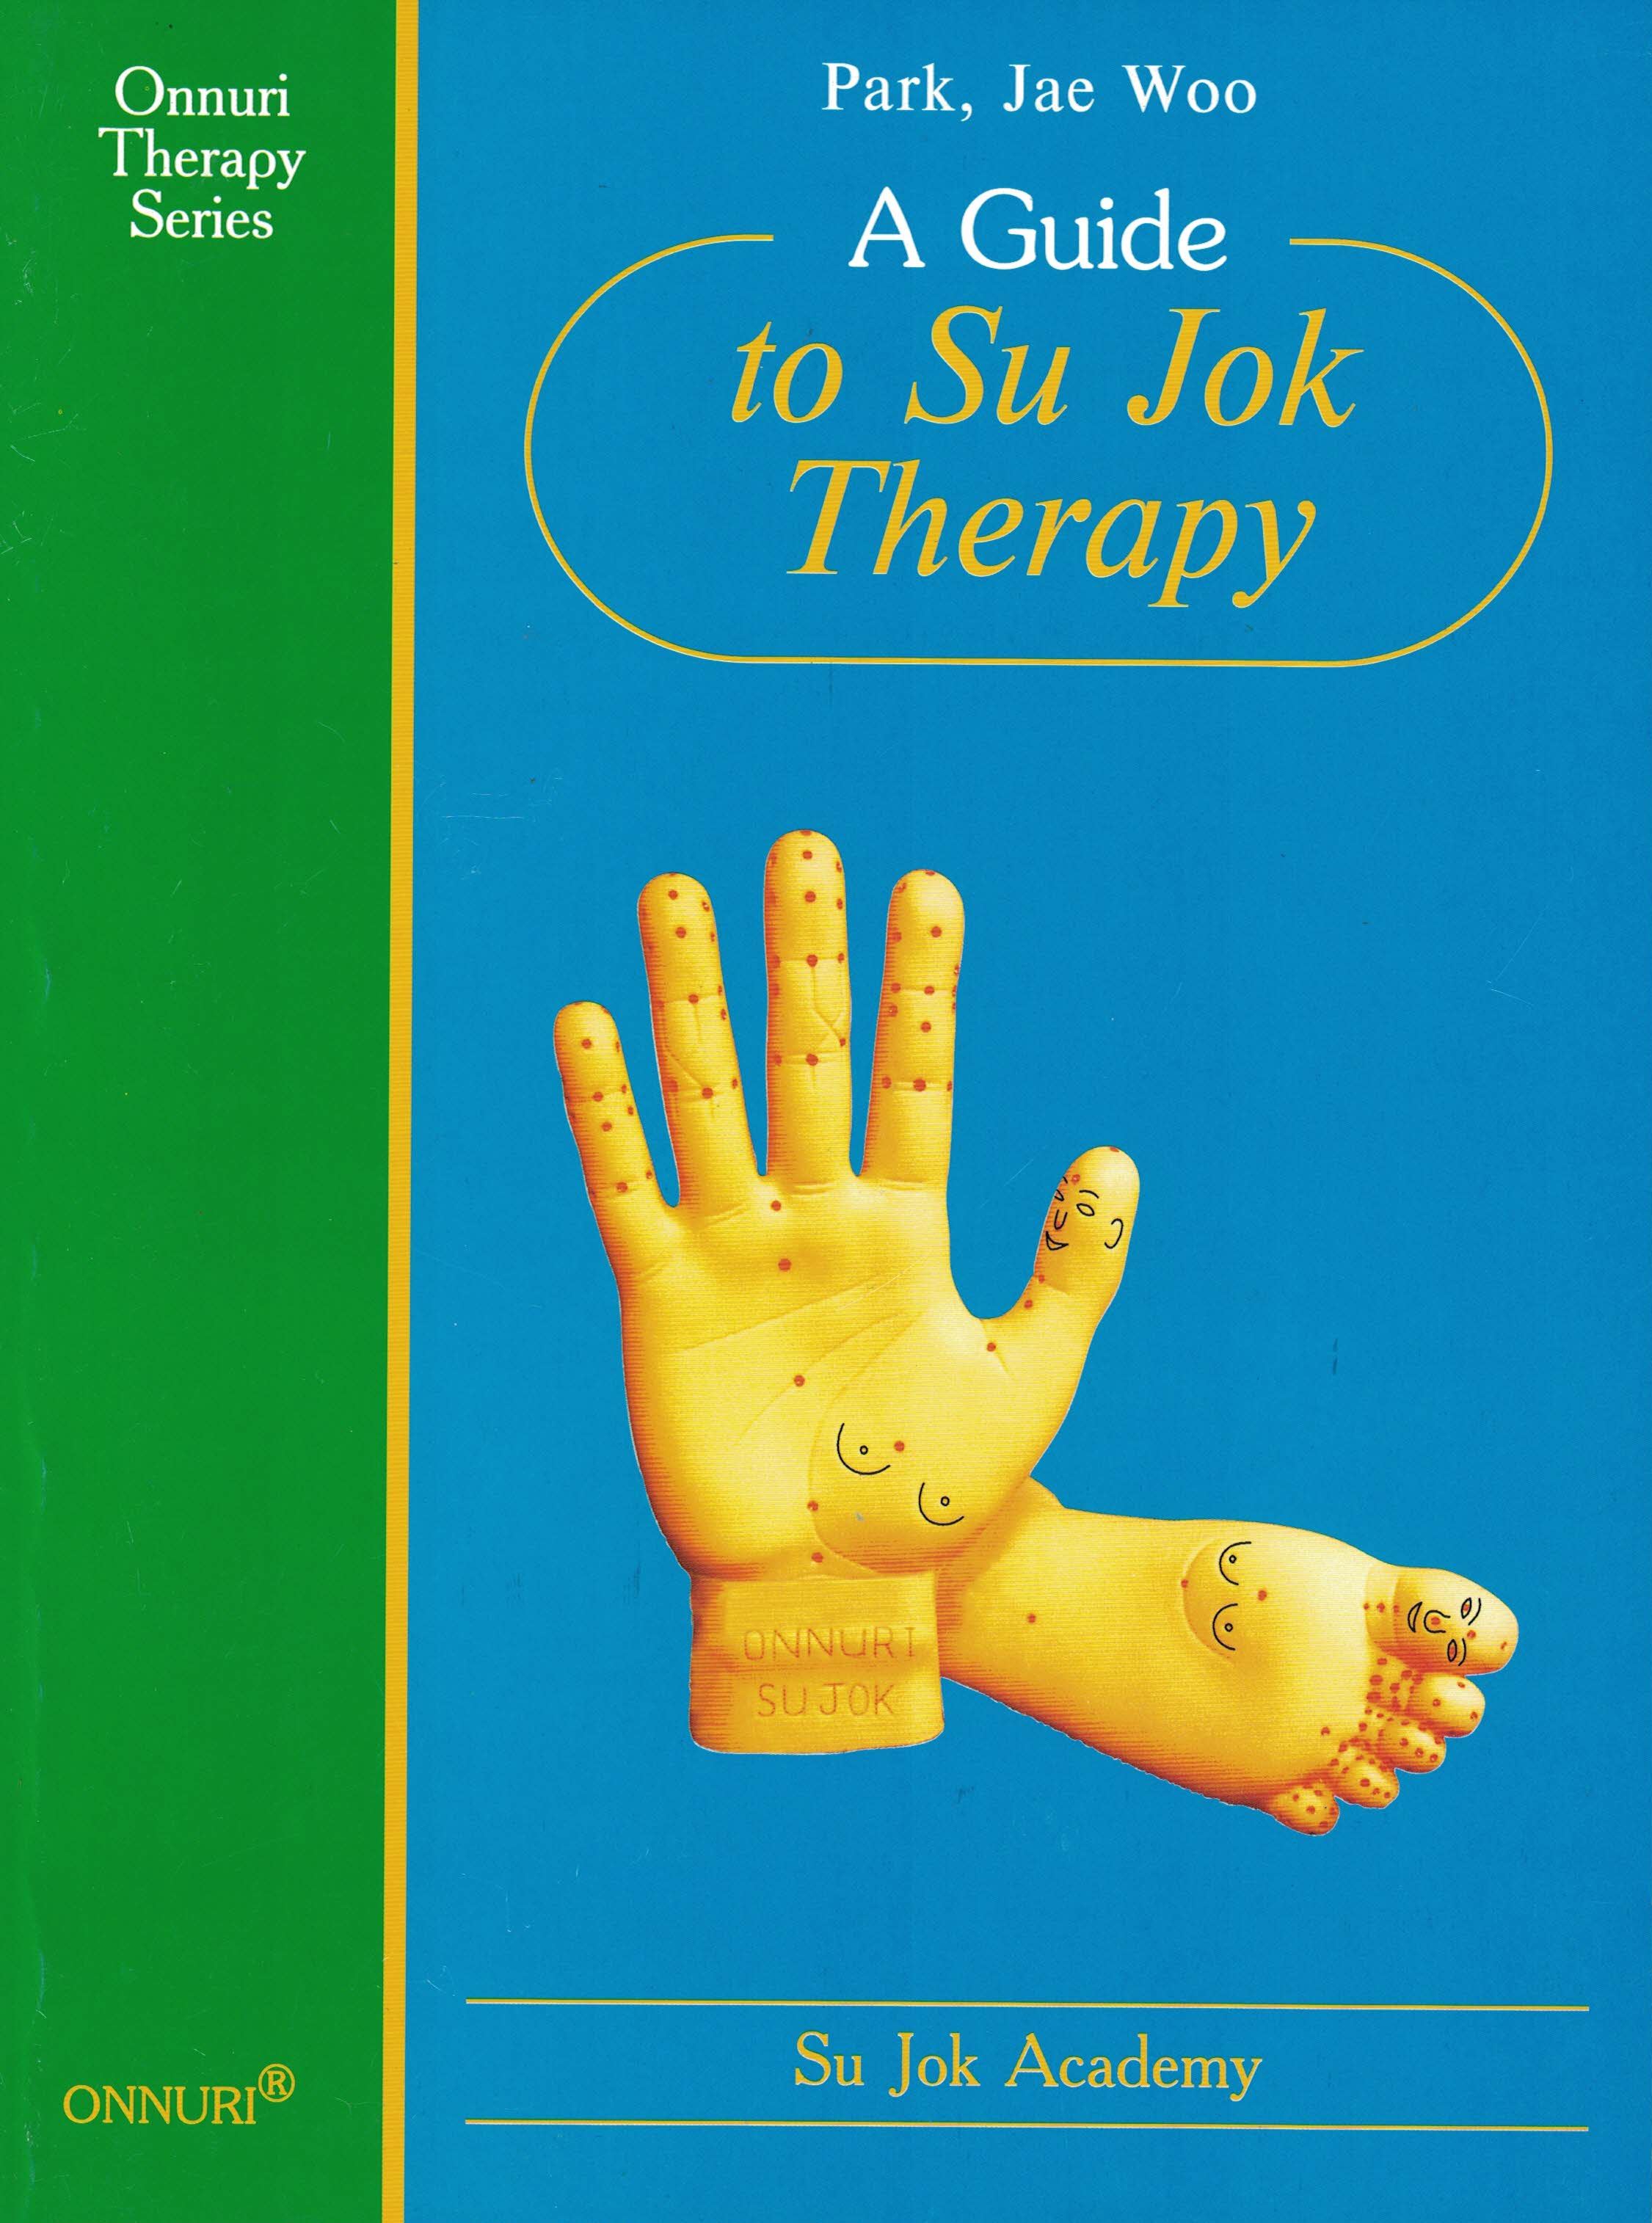 The Guide to Su Jok Therapy